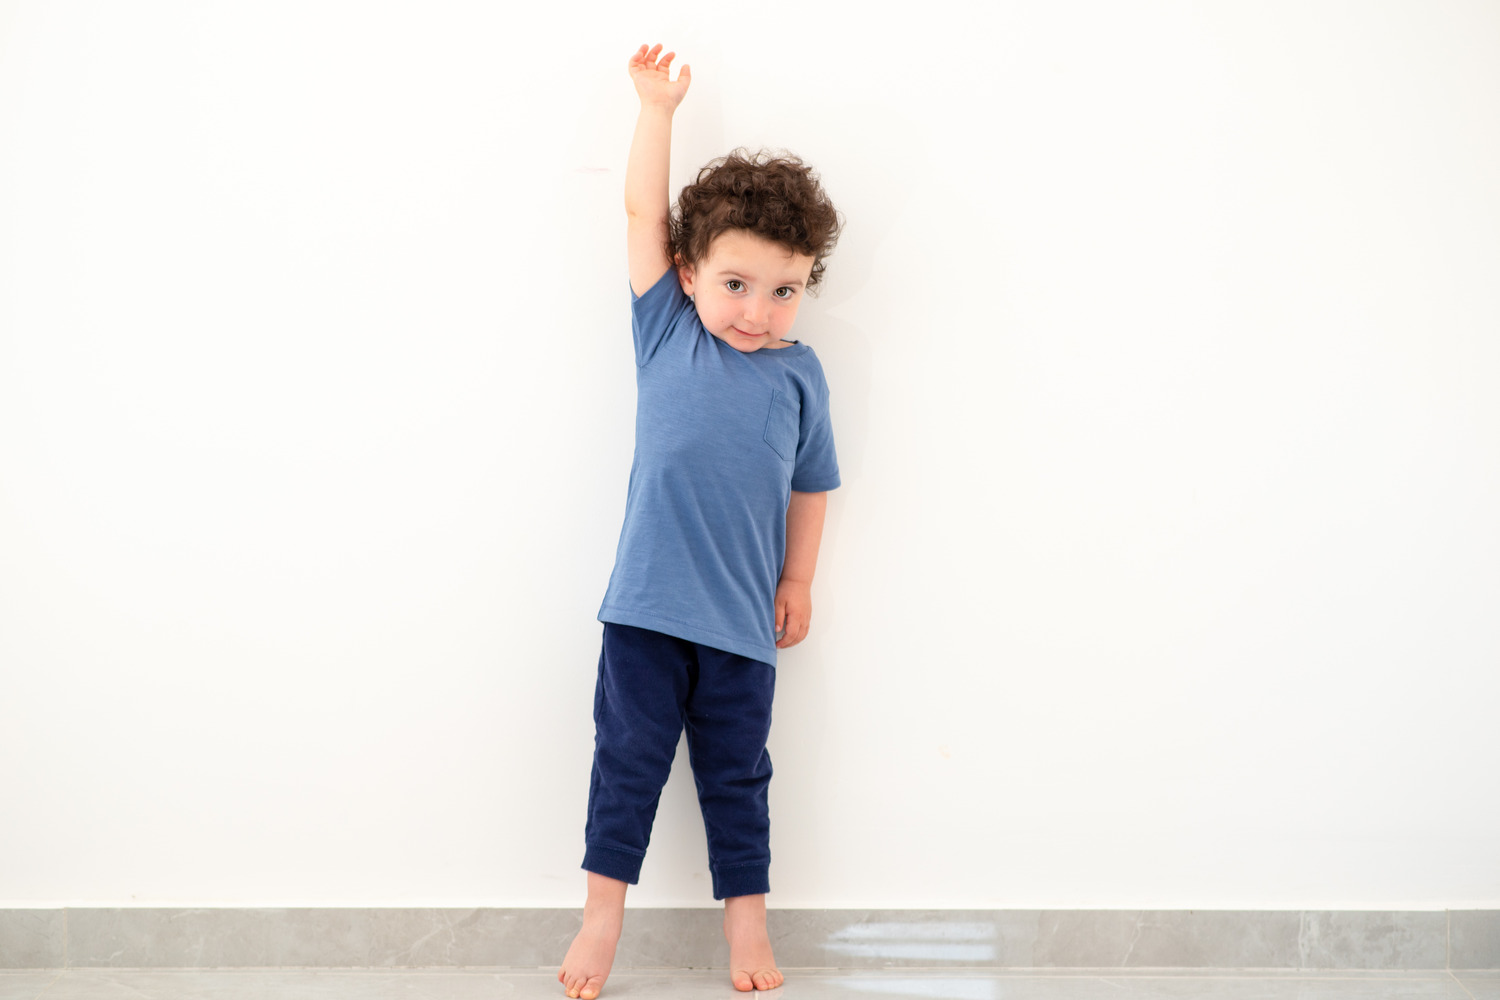 Factors Affecting a Kid's Height And Weight